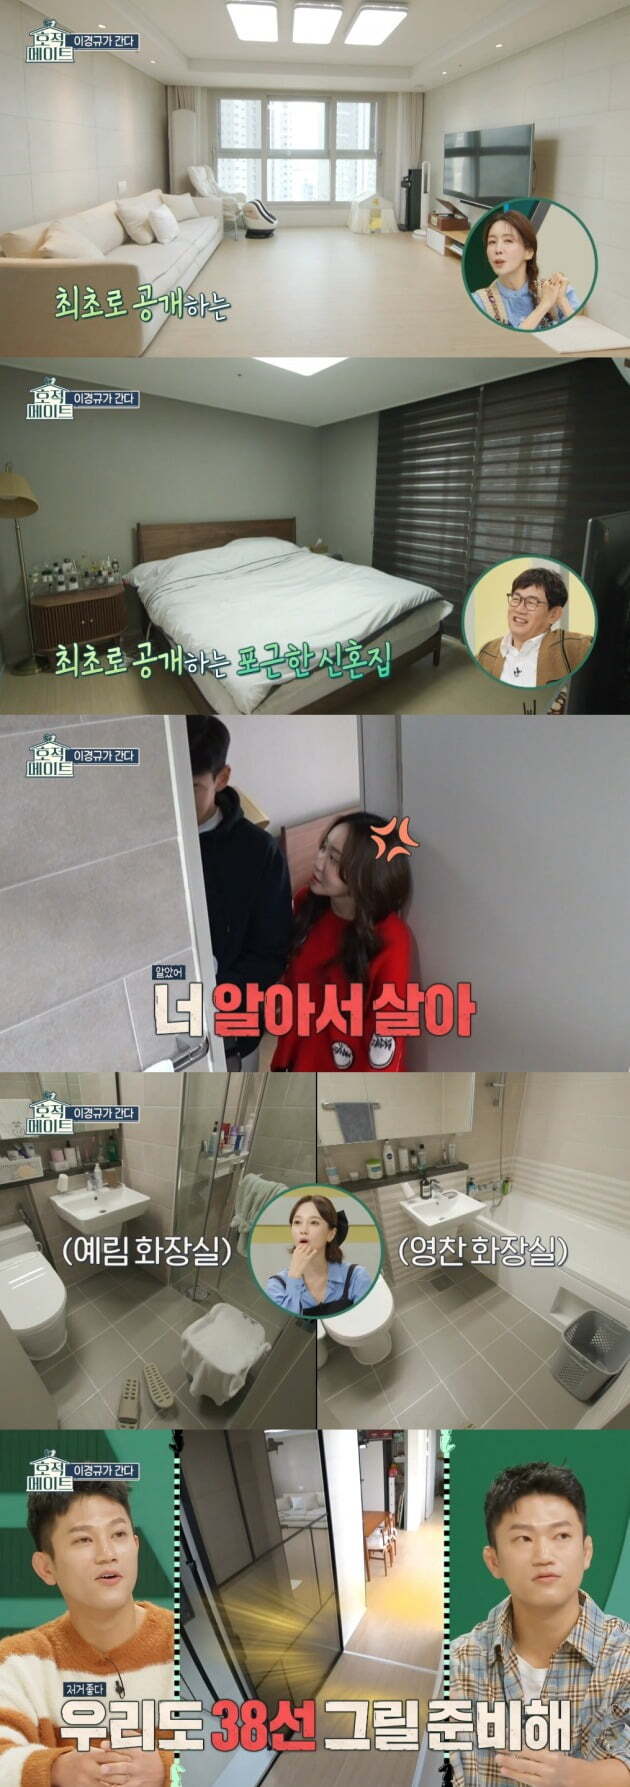 While comedian Lee Kyung-kyu first visited her daughter Lee Ye Rims newlywed home, she showed gratitude for Yoo Jae-Suk, who missed her daughters wedding and prevented the massive spread of a new coronavirus infection (Corona 19).In MBC entertainment family mate broadcasted on the 8th, Lee Kyung-kyu, who visited Lee Ye Rim and Kim Young-chans newlyweds house, was included.Lee Kyung-kyu packed up the back seat of the car and headed to Lee Ye Rims honeymoon house in Yangsan Changwon.Lee Kyung-kyu said, I am going to deliver the remaining luggage at home, he said. I am curious and worried about how I live.If it was not family mate, it might not have gone down, he grumbled.Lee Ye Rim, who married Kim Young-chan, a soccer player from Yangsan FC last December, said, I have been married for a while and my brother was away during the winter training.I dont feel like Ive been living with you for a while, he said.The newlyweds house was first unveiled, along with a large and clean family, and a dog, Rung, who was raised with Lee Kyung-kyus family in Seoul, was also seen.In particular, the two people attracted attention with their tendency to organize and arrange, drawing up to 38 lines.I hope that the things I used to write in my group life will be put in place, Kim said in a meticulous style that would be so precise when organizing things.Lee Ye Rim, on the other hand, said: I dont think I need to set the angle; I remember where I put things in my own way, but my husband has to set the heat with O.I do not think it is right to live each time. So the living room toilet is Kim Young-chan, and the bathroom is Lee Ye Rim.When Kim Young-chan looked at the bathroom in the room and nagged, You live on your own, Lee Ye Rim said, I care only about your area, this is my area.Lee Kyung-kyu, who saw this in the studio, laughed when he said, Its not my job.Lee Ye Rim and Kim Young-chan prepared a side dish together while Lee Kyung-kyu took five hours to come down.Lee Kyung-kyu arrived at the newlyweds house and looked around the house in an awkward atmosphere. Lee Kyung-kyu is still called Kim as if his son-in-law Kim Young-chan was awkward.Lee Kyung-kyu, in particular, laughed more than his daughter. Lee Kyung-kyu said, Yerim is empty.But the vacancy in Rongji is too empty. Waiting for the steamed white, the three watched the wedding video together, Lee Kyung-kyu holding her daughters hand and saying, I did not know that moment would come.Boom, Jurye Lee Dukhwa, Celebration Lee Soo-geun, Kim Jun-hyun and Jo Hye-ryun appeared.Lee Kyung-kyu said of Jo Hye-ryuns celebration, The other day Jo Hye-ryun called and said he would celebrate, I should not do it if I wanted to.Lee Kyung-kyu then expressed gratitude for Yoo Jae-Suk, who was absent from the wedding ceremony even in the first voice decision.Since then, Yoo Jae-Suk has been praised for his desirable response to the Corona 19 confirmation and preventing large-scale spread.Lee Kyung-kyu said, I called Yoo Jae-Suk the next day and thanked him.I heard a corona voice the day before, but I was so nervous that I did not come. Lee Kyung-kyu told Lee Ye Rim, Did you get a gift?, and Lee Ye Rim replied, The duke sent me.Lee Kyung-kyu, who left filming for Channel A entertainment Urban Fisherman 3 as soon as the wedding ended, said: It was so good, your mother looked so lonely that she ran right away.I went to the recording when Yerim was born. I gave birth after the recording. 